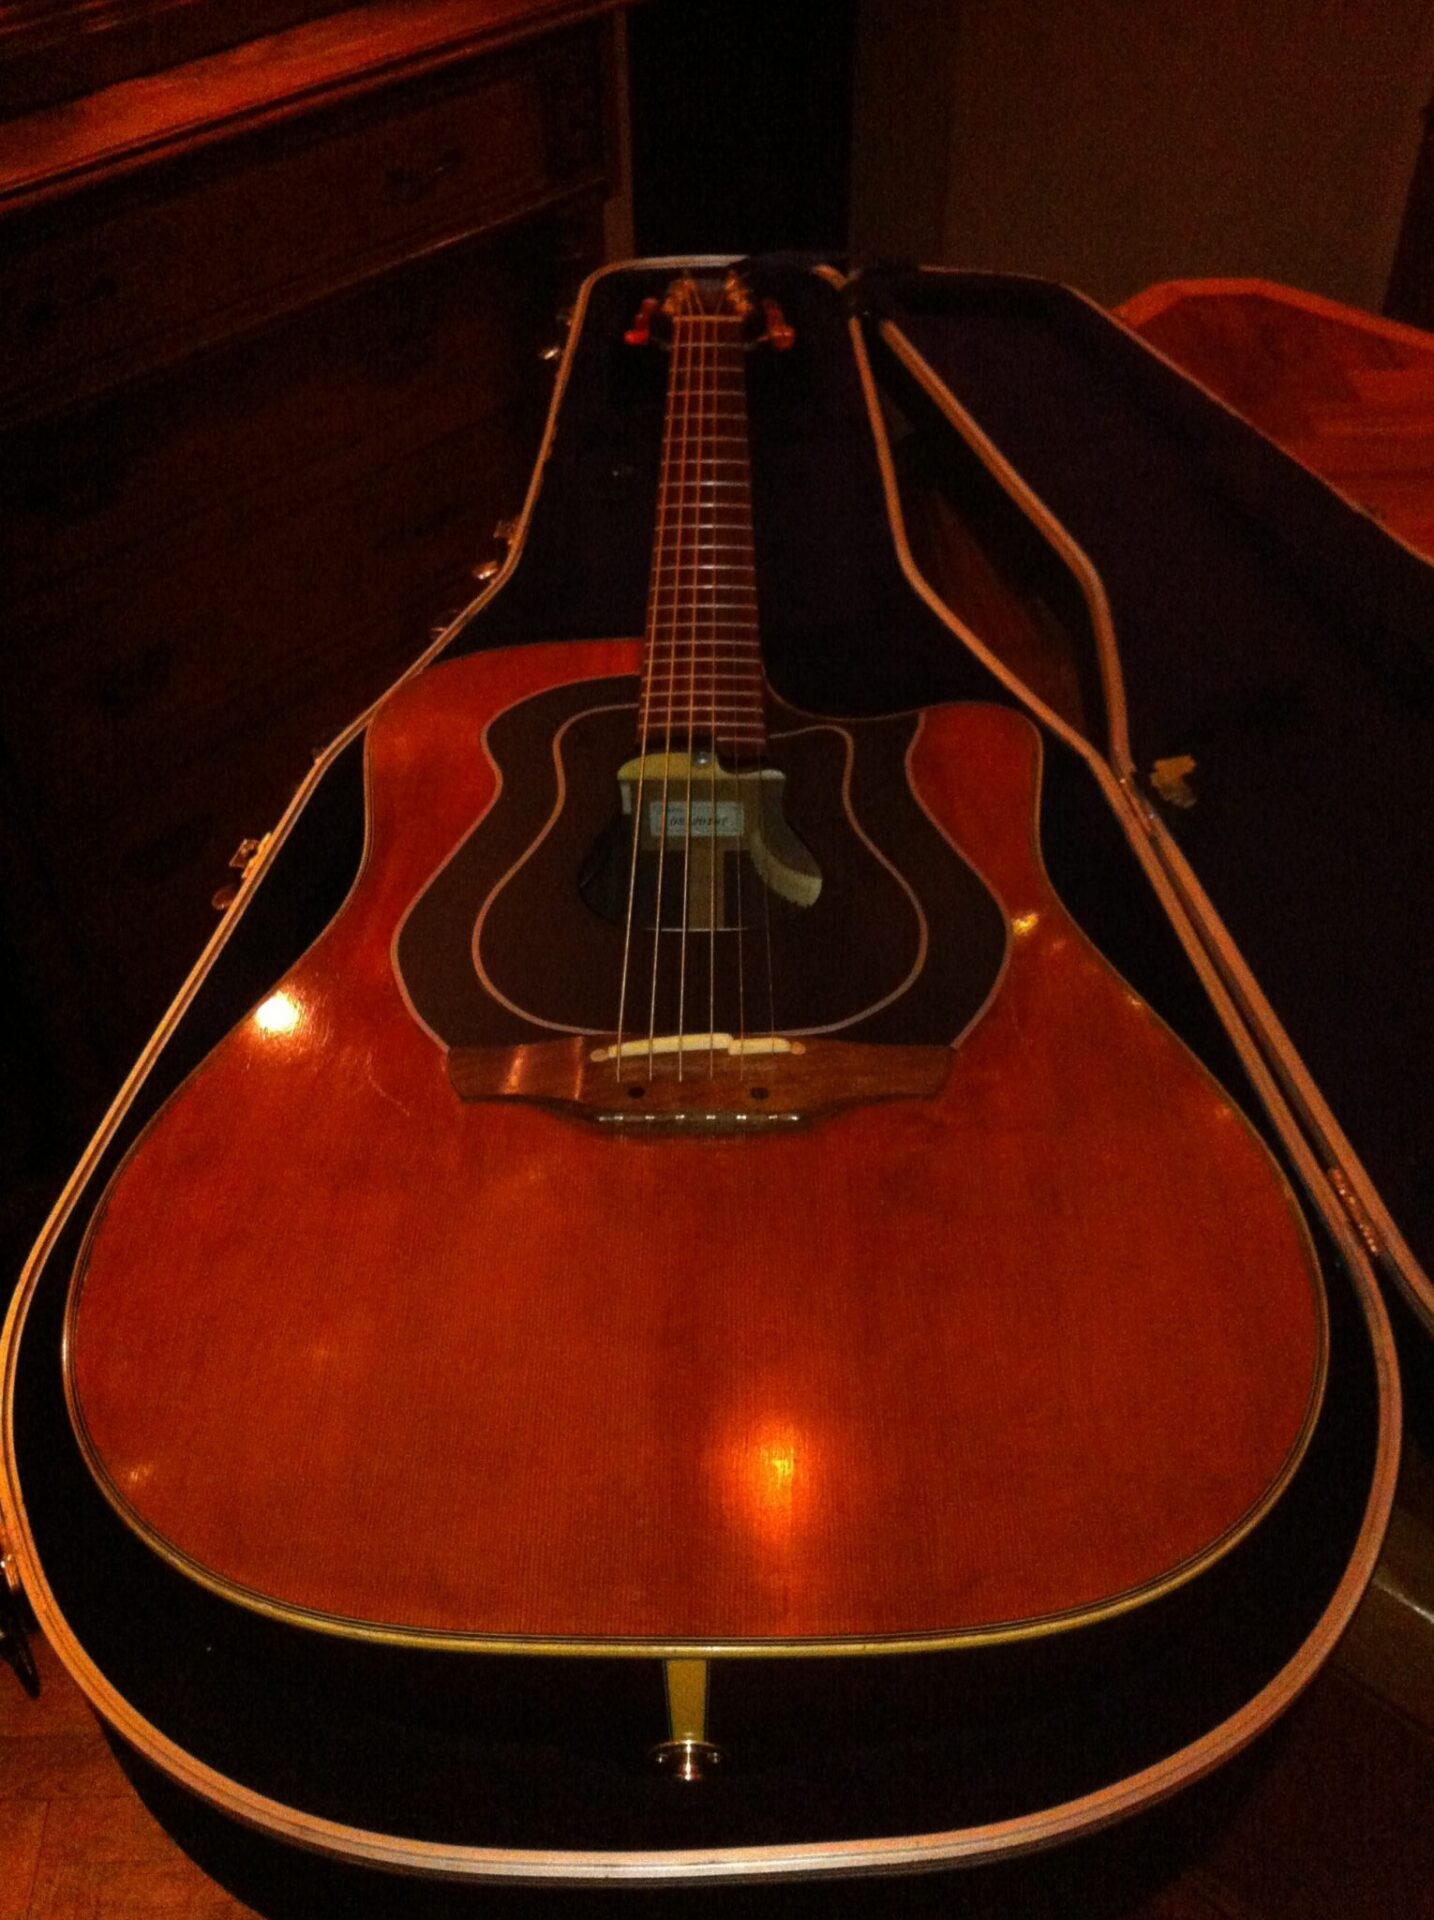 The GB-7c that I have in Germany